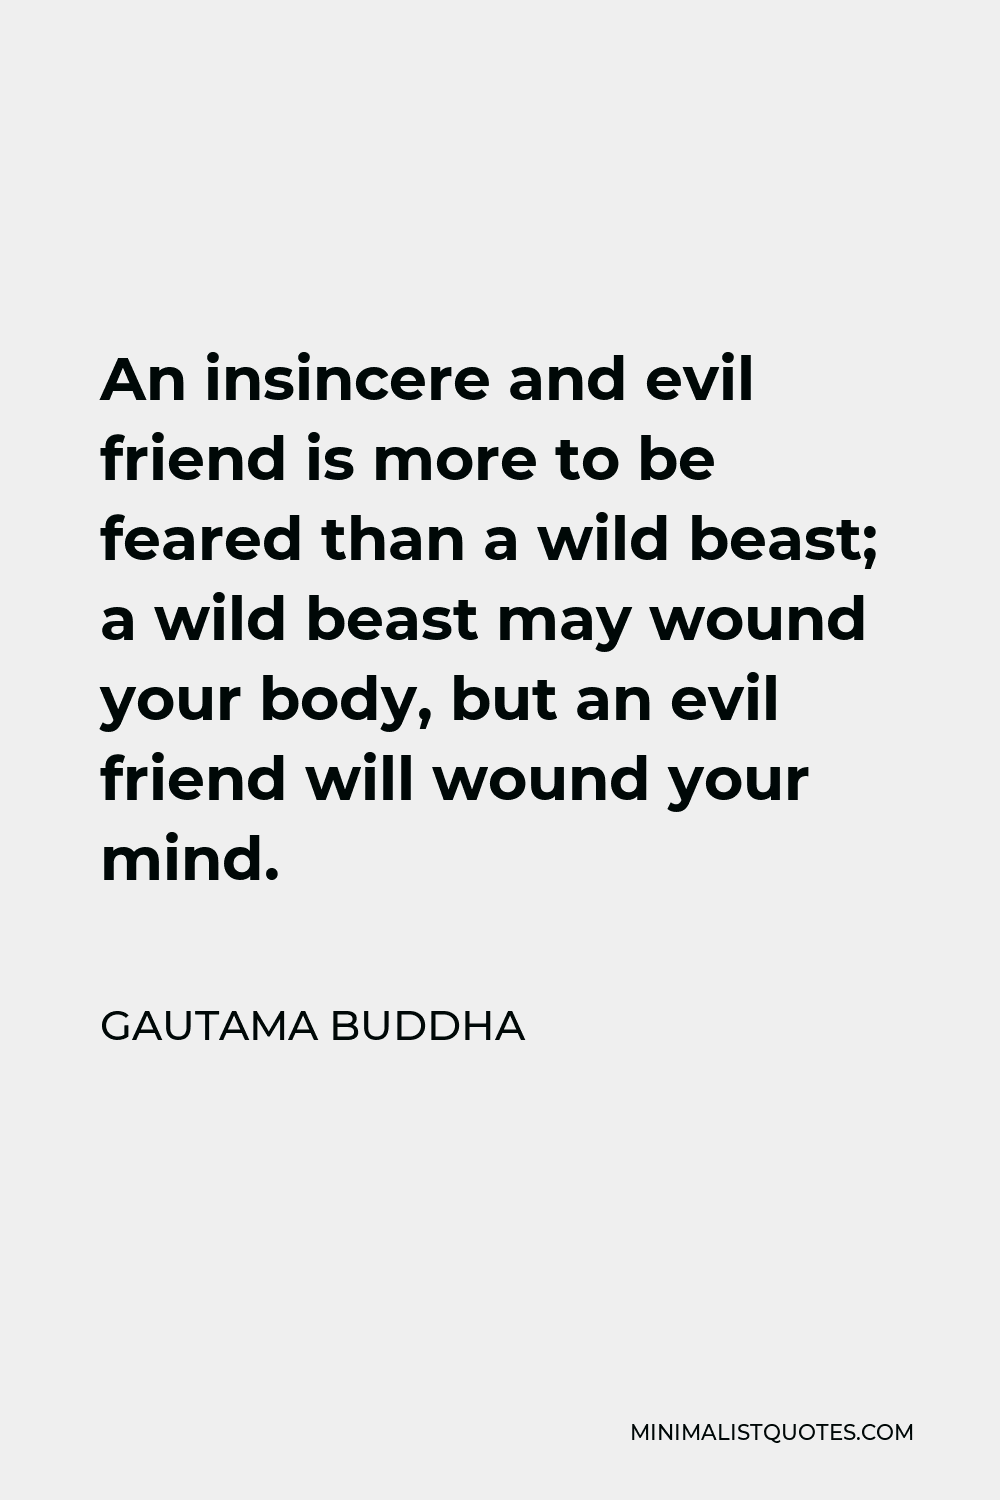 Gautama Buddha Quote - An insincere and evil friend is more to be feared than a wild beast; a wild beast may wound your body, but an evil friend will wound your mind.